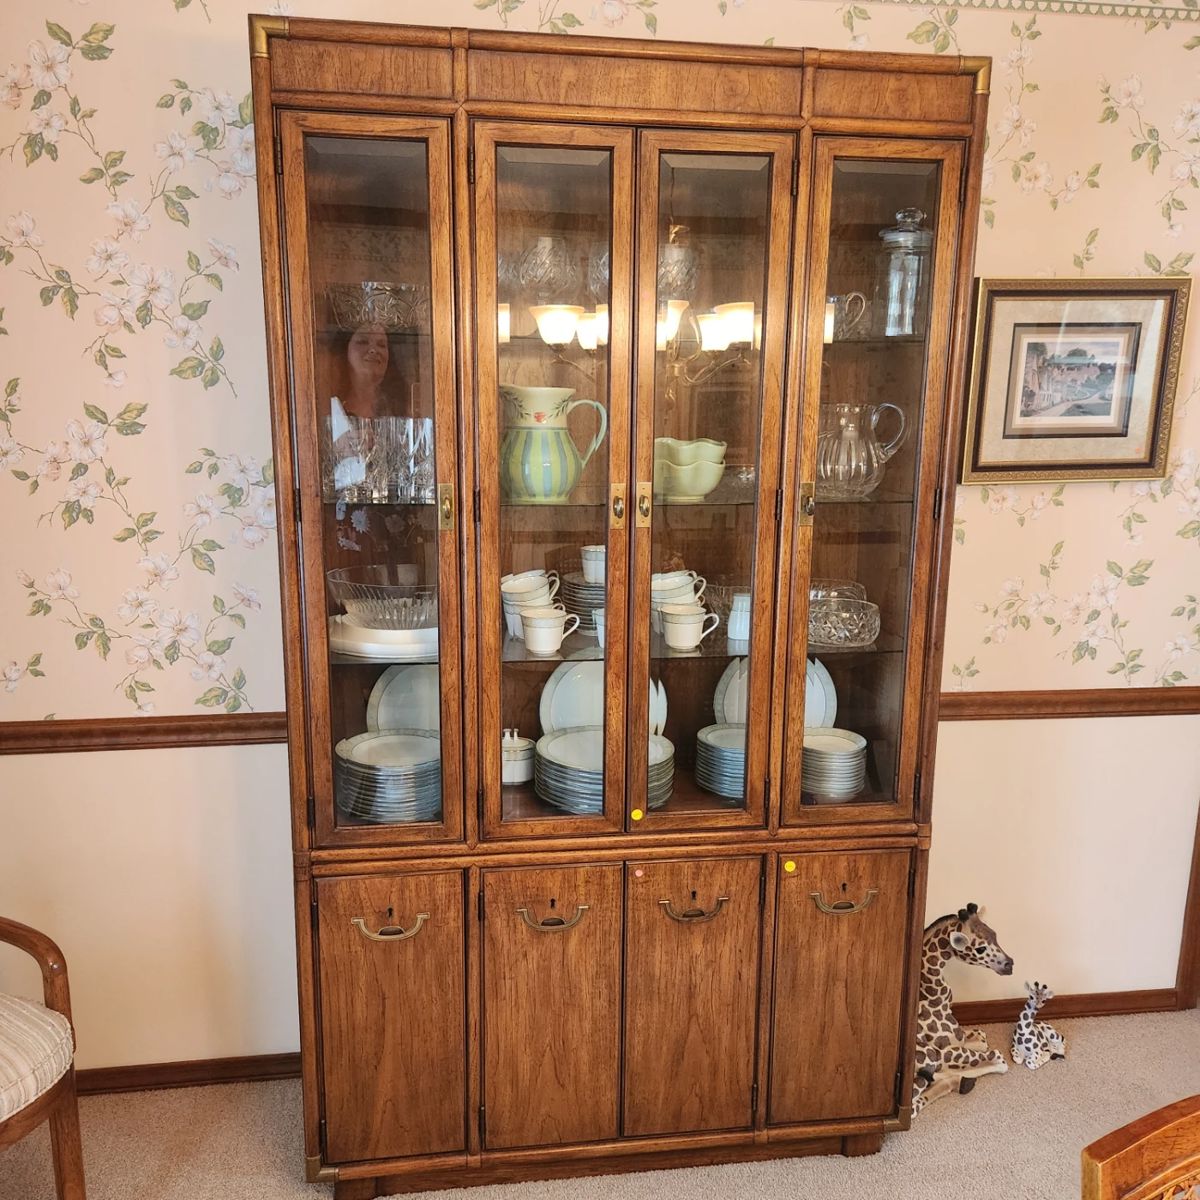 Drexel Campaign Pecan and Brass Hutch, Cabinet, Mid-century Modern 